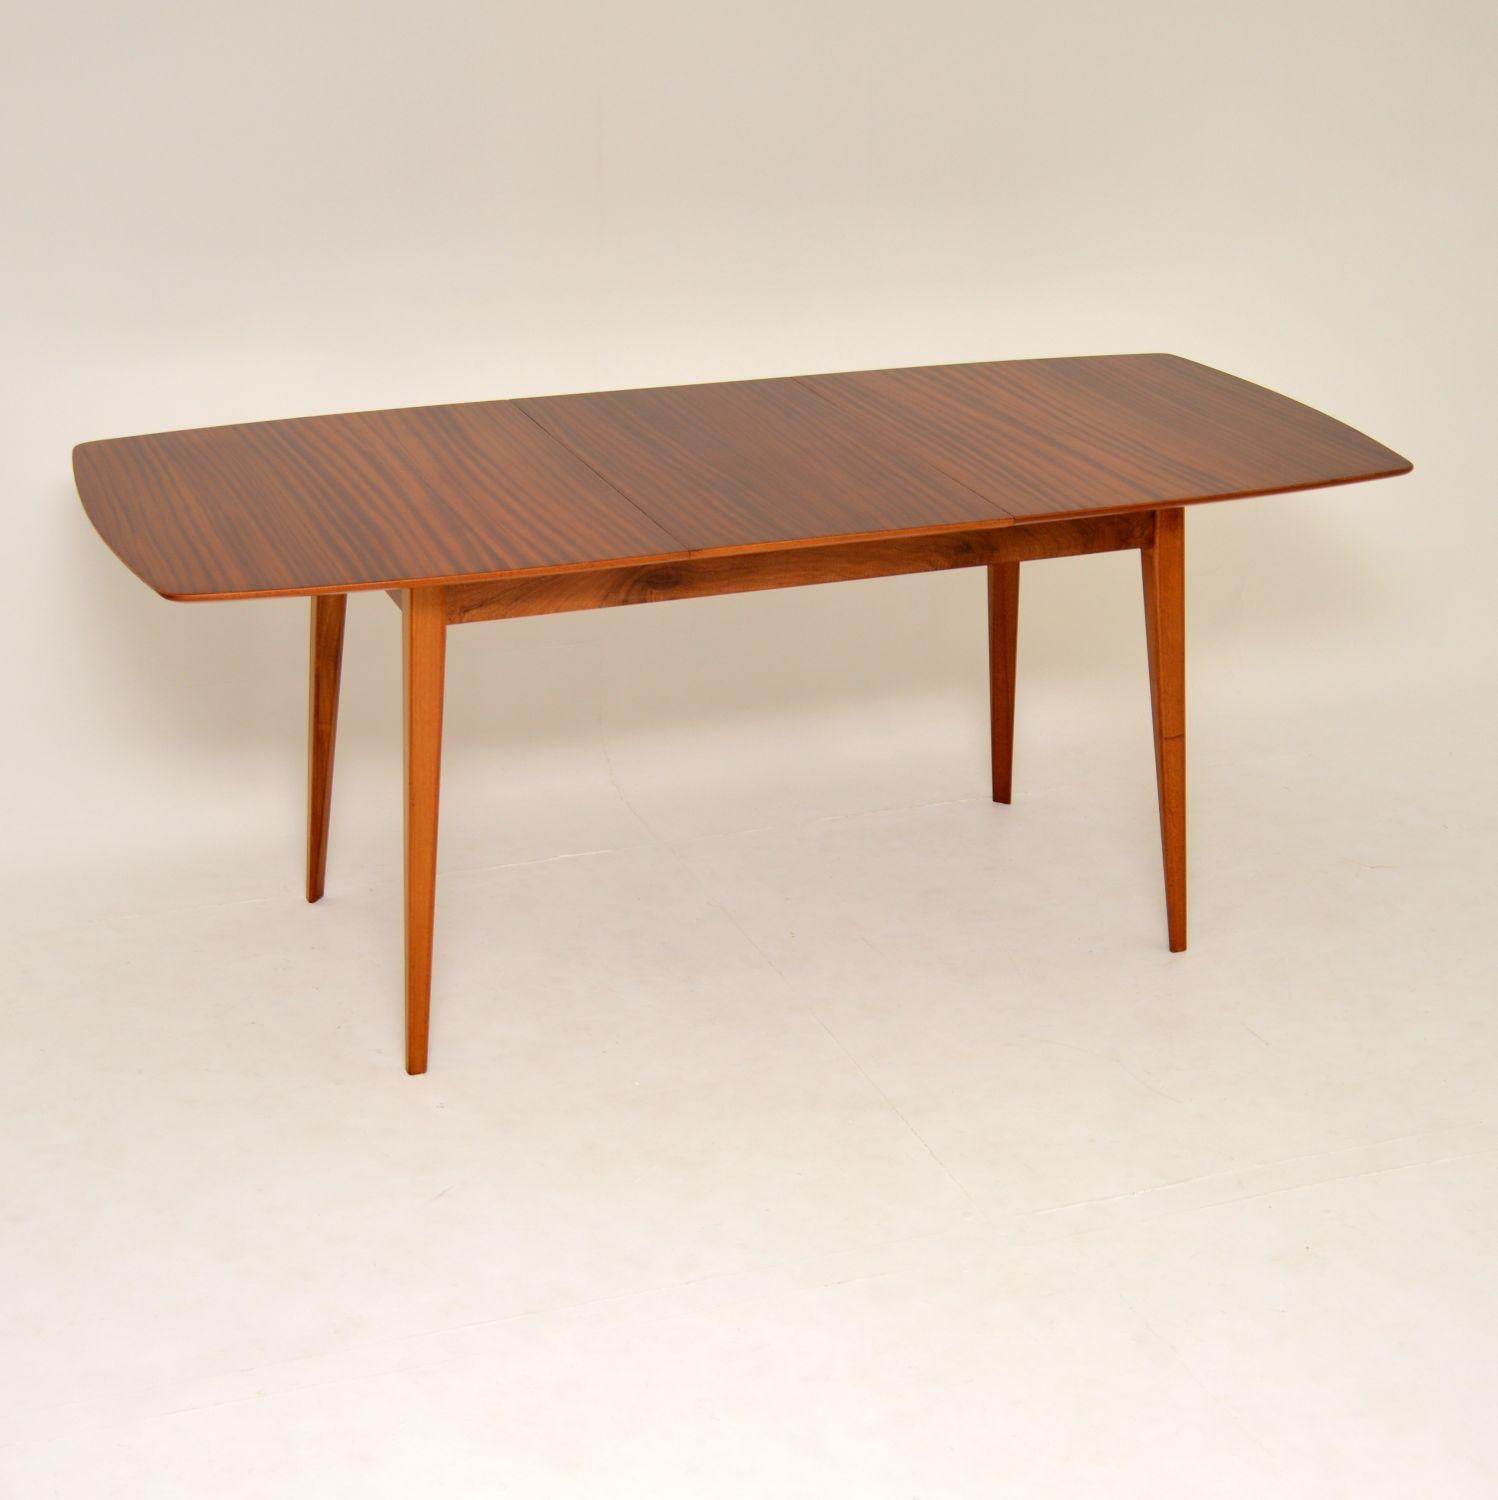 A stylish and very well made vintage dining table, beautifully made in mahogany. This was designed by Peter Hayward, it was made by Vanson in the 1950s-1960s. This has an extra extension leaf to increase the dining area, this is stored beneath the